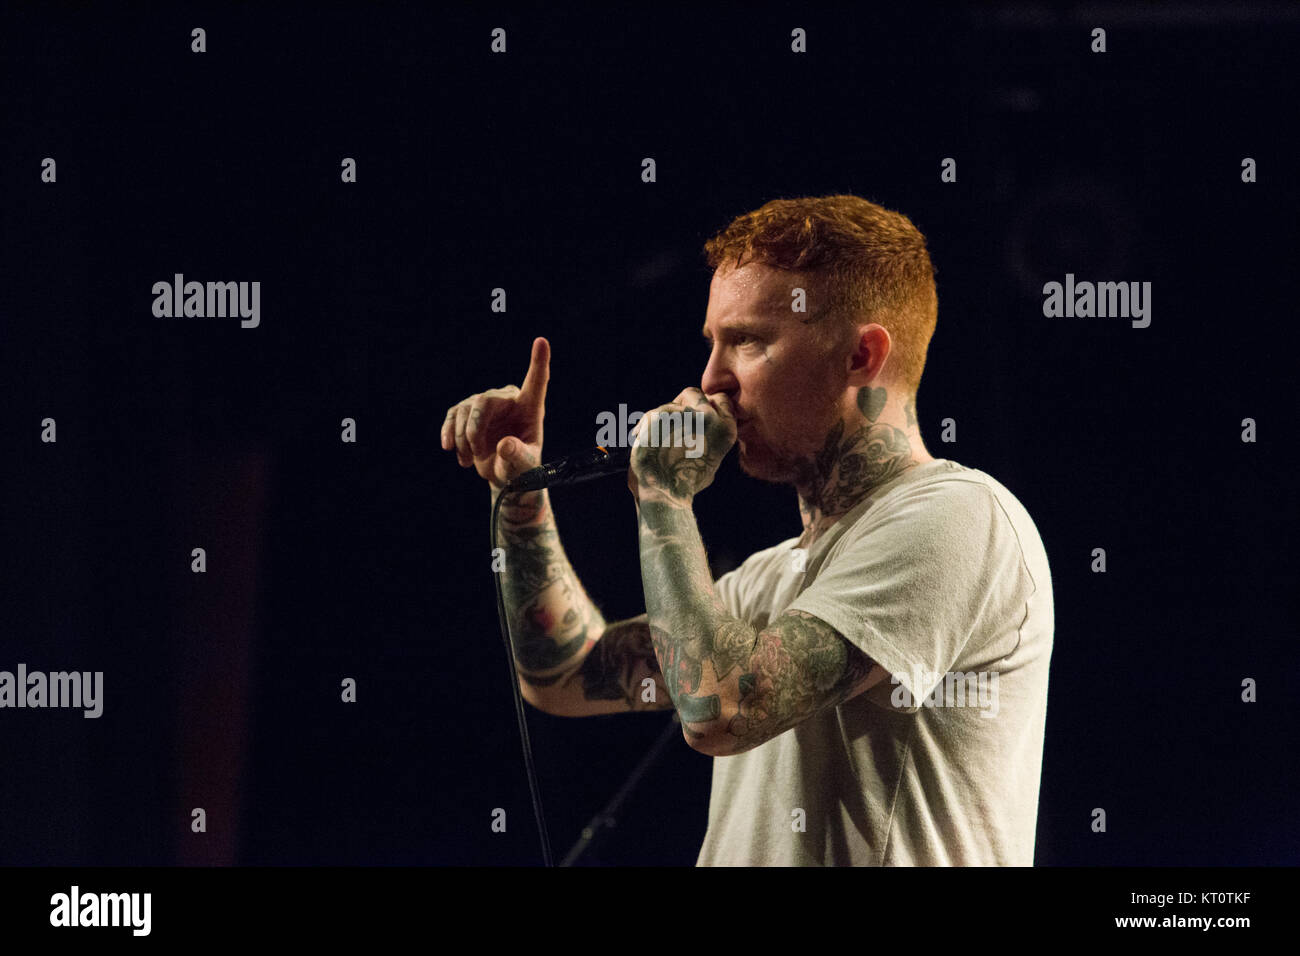 The English band Frank Carter & The Rattlesnakes perform a live concert at Parkteatret in Oslo. Frank Carter is also known from the band Gallows and Pure Love. Norway, 01/12 2015. Stock Photo